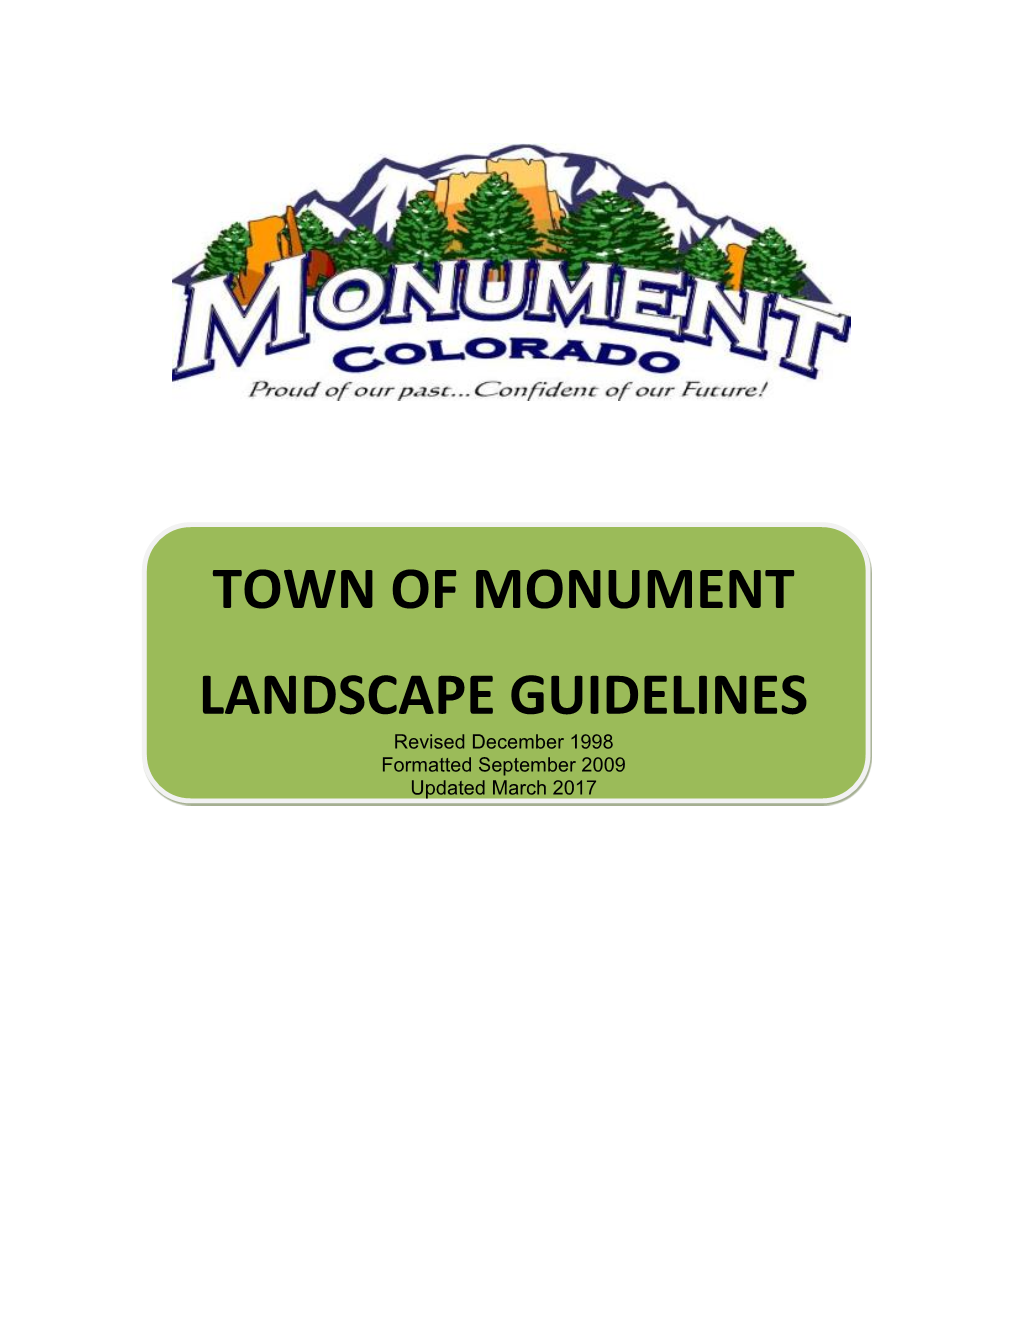 Town of Monument Landscape Guidelines Are Intended to Supplement the Town’S Adopted Landscape Regulations Found in the Town of Monument Zoning Ordinance Section 17.52